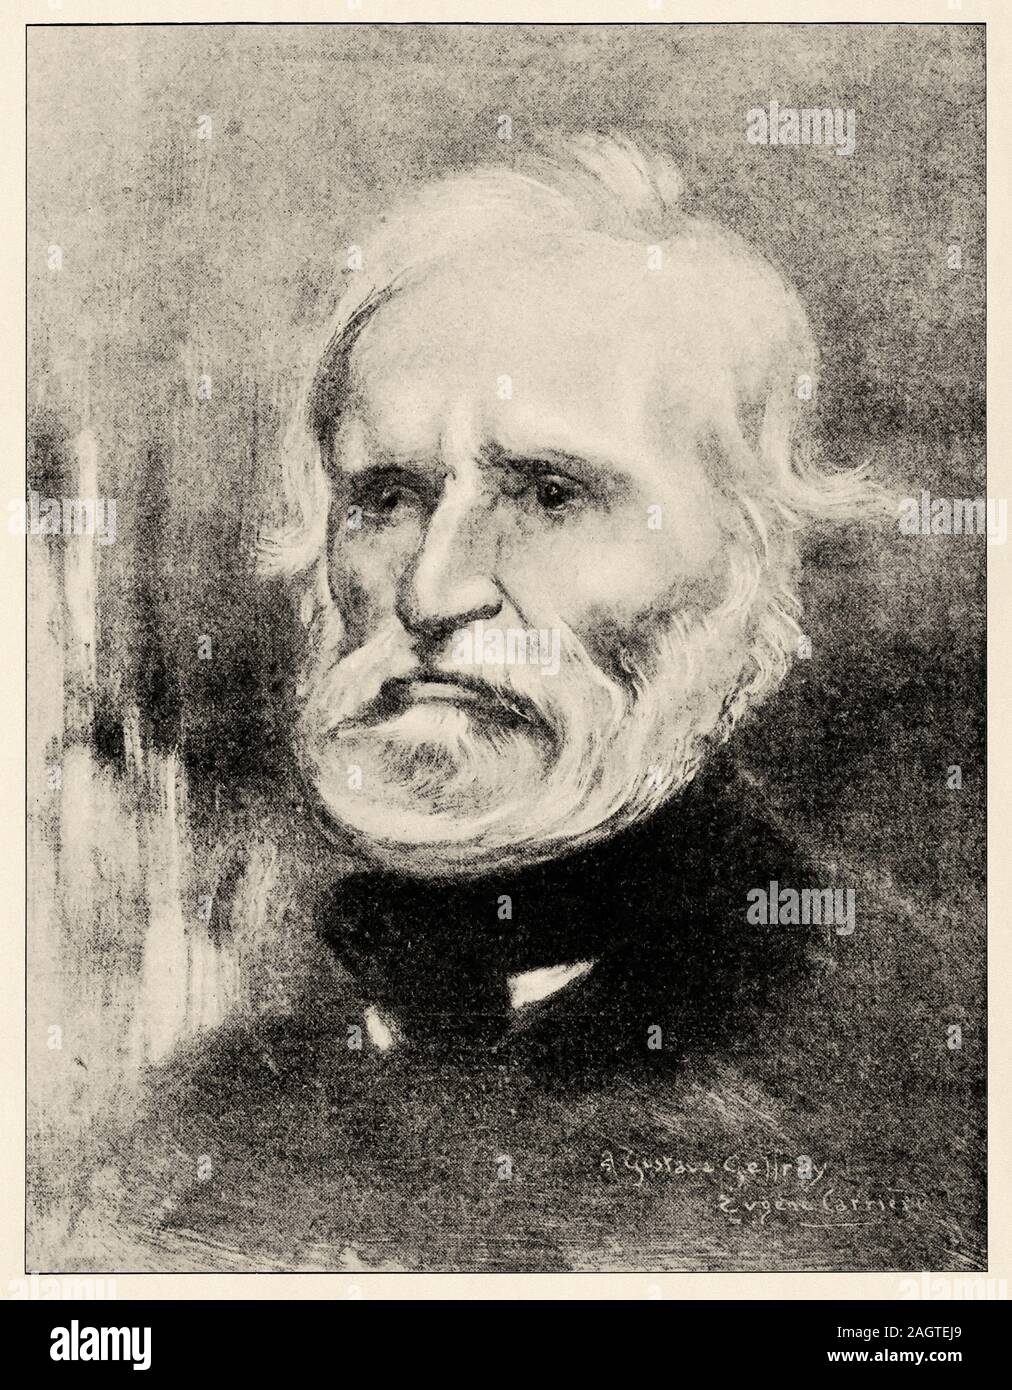 Portrait of Louis Auguste Blanqui (Puget-Théniers, France, February 8, 1805 - Paris, France, January 1, 1881), said Auguste Blanqui, was a French revo Stock Photo